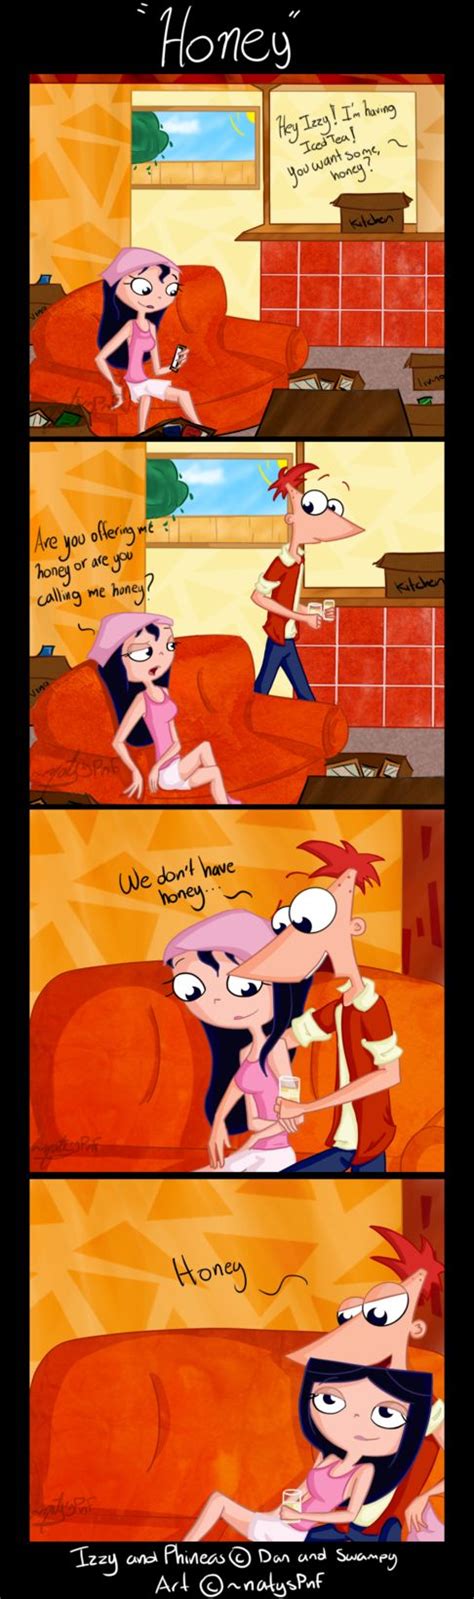 Fireside Colours - A Phineas and Ferb Story Rule 34 comics (Phineas and Ferb) by [Palcomix] Immerse yourself in the rule 34 porn world of your favorite porn comics. HOME; LATEST UPDATE; Rule 34 Videos; ADVANCE SEARCH. ... Free Porn Comics are provided and uploaded by 3rd party non affiliated registered members on this site. We take no ...